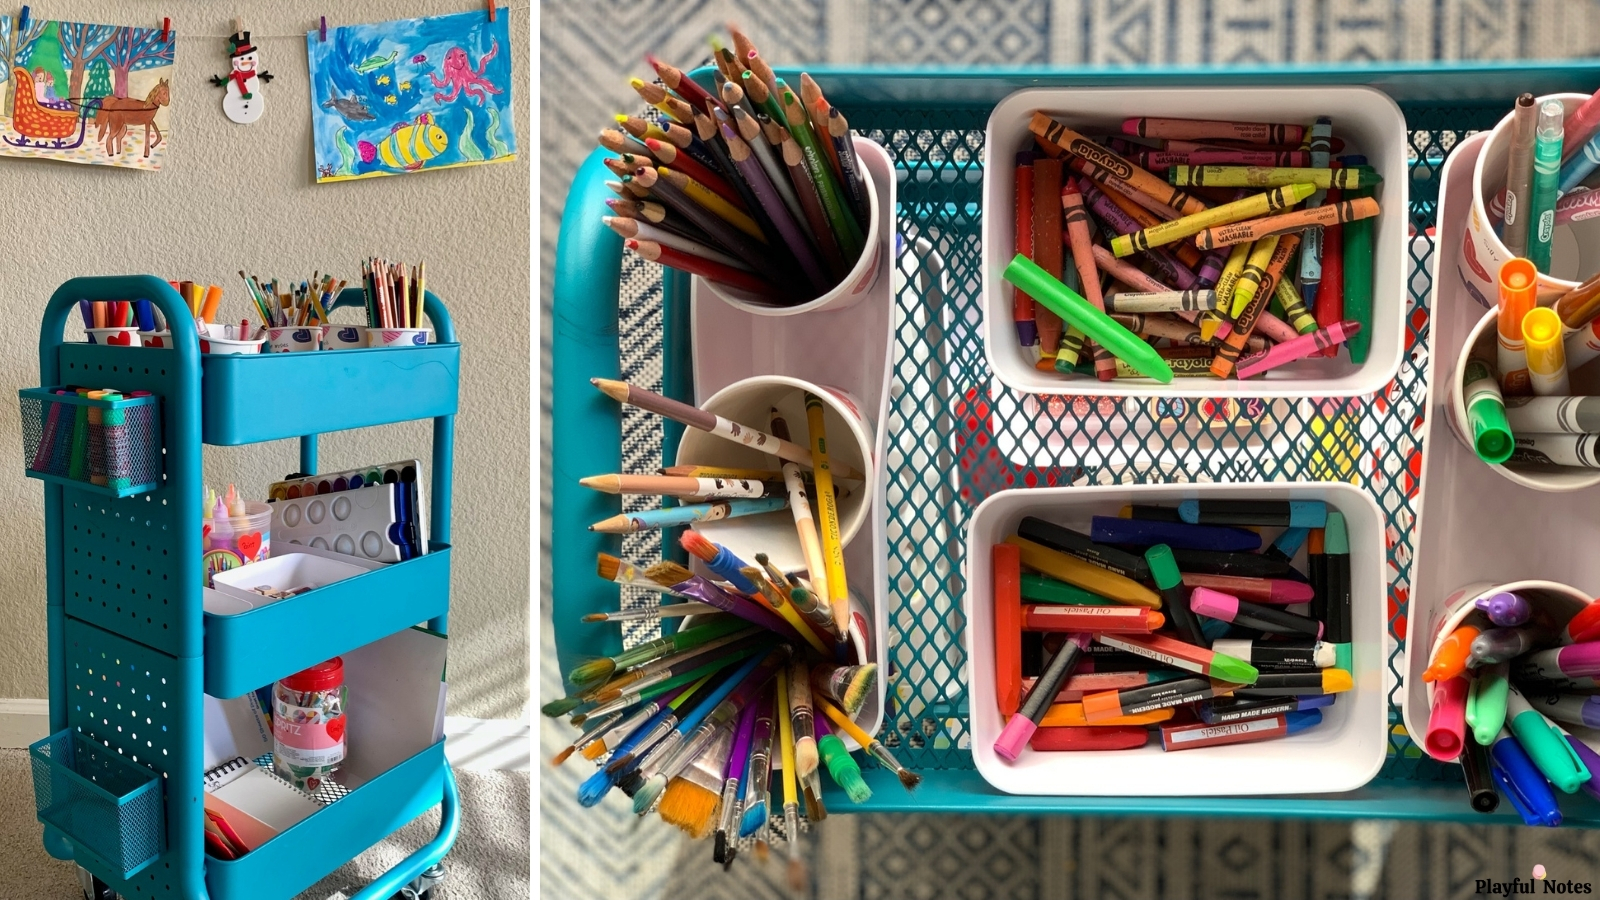 How to create an art cart for kids that will bring hours of creative fun